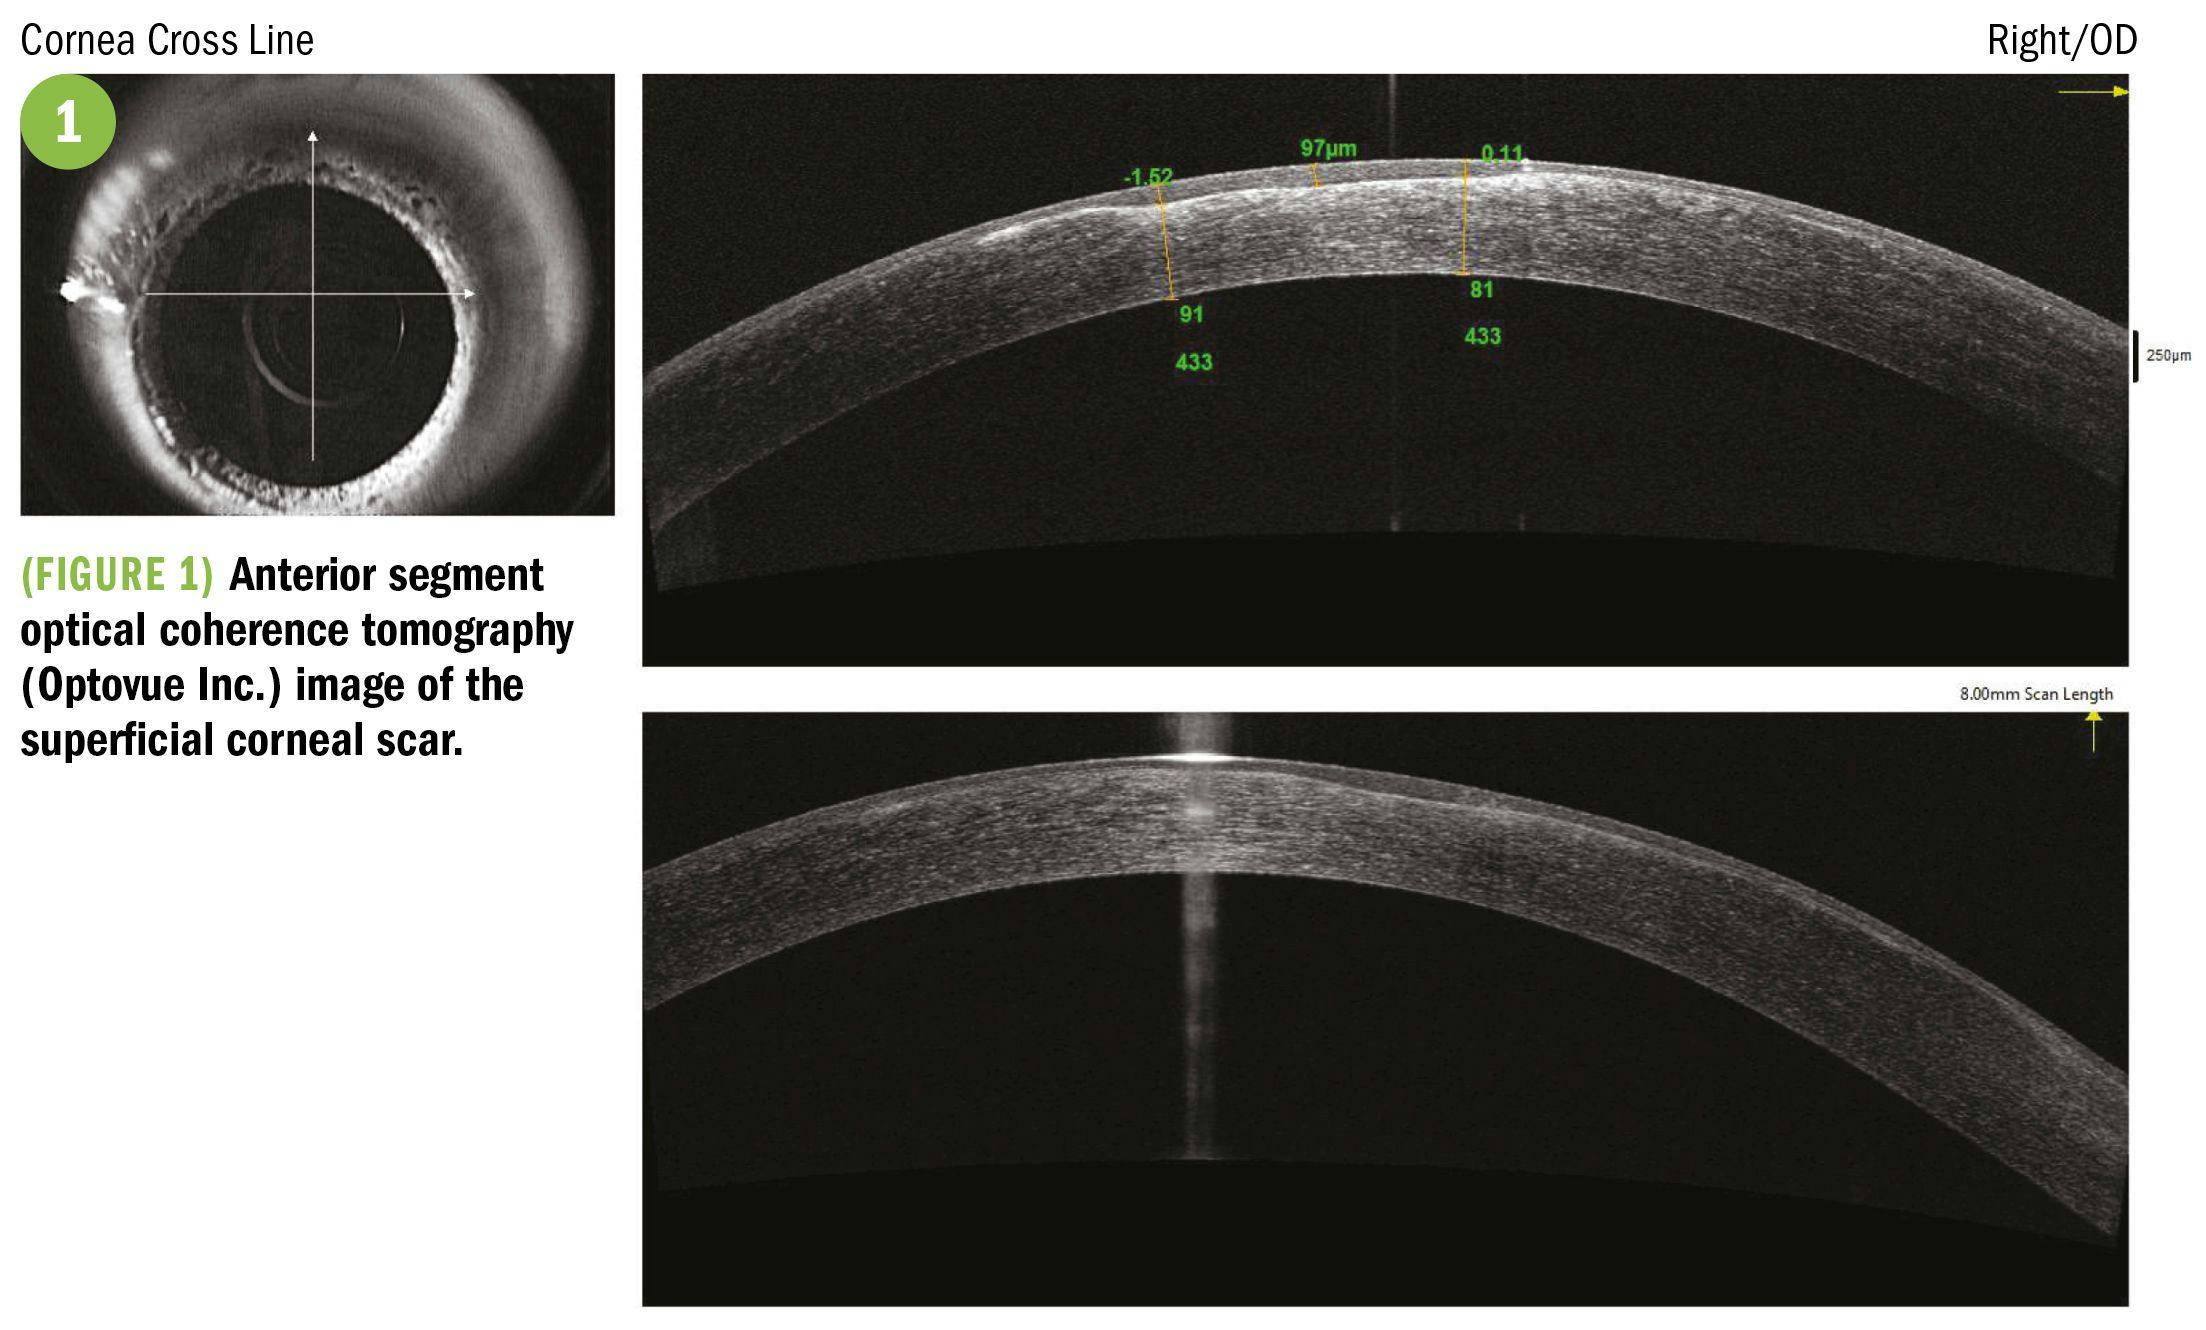 Image of superficial corneal scar through optical coherence tomography